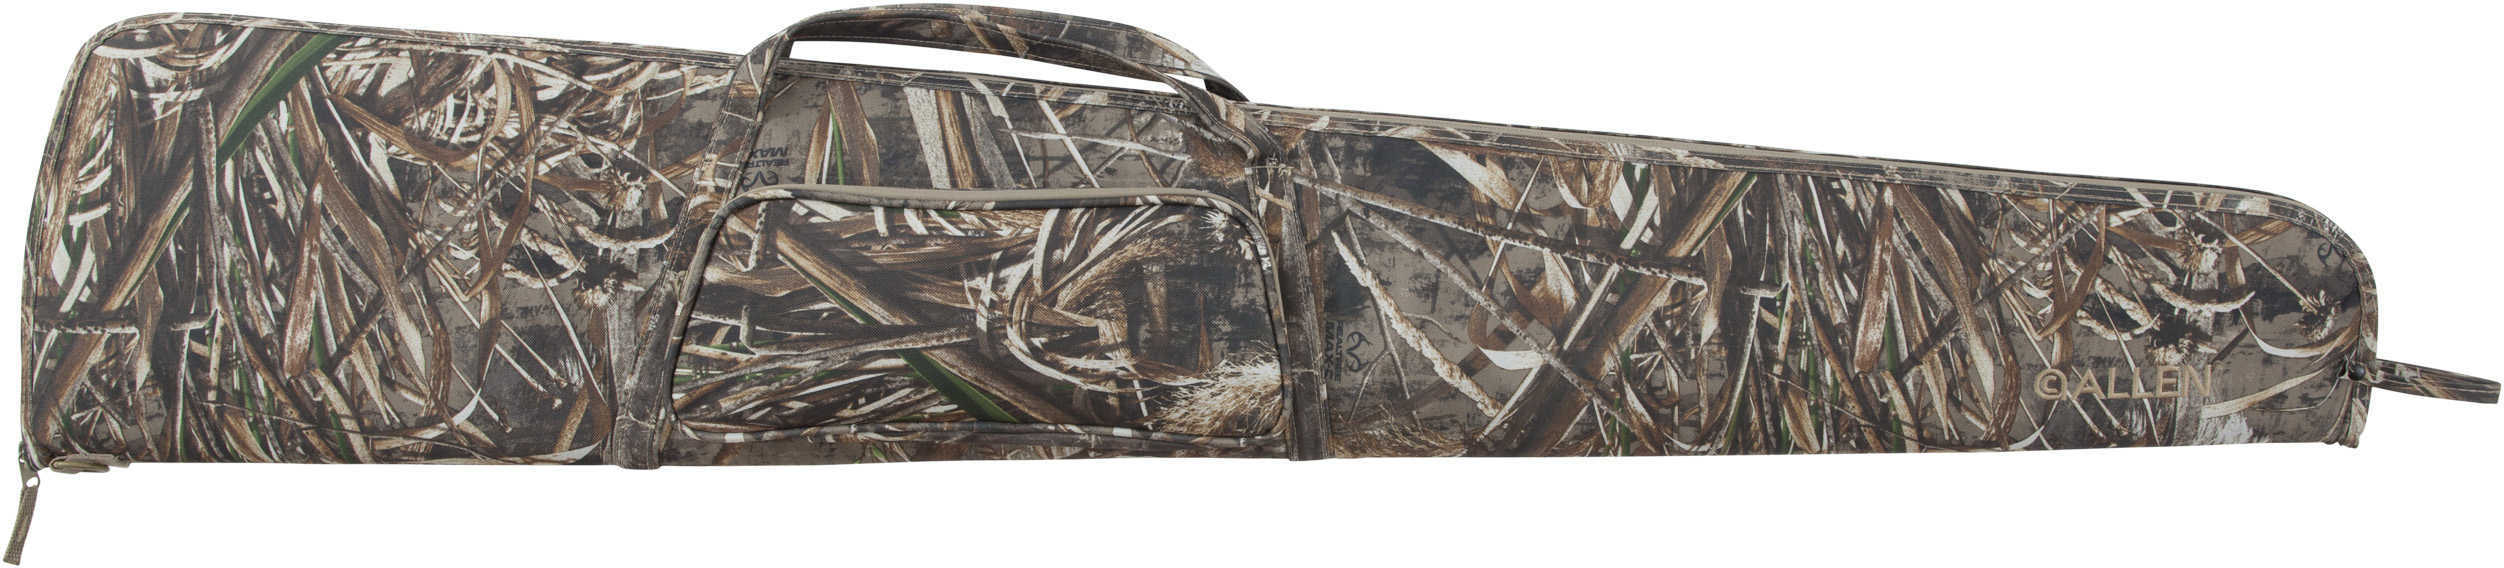 Allen Cases 52-Inch Cattail Floating Gun Realtree Max5 Md: 766-52